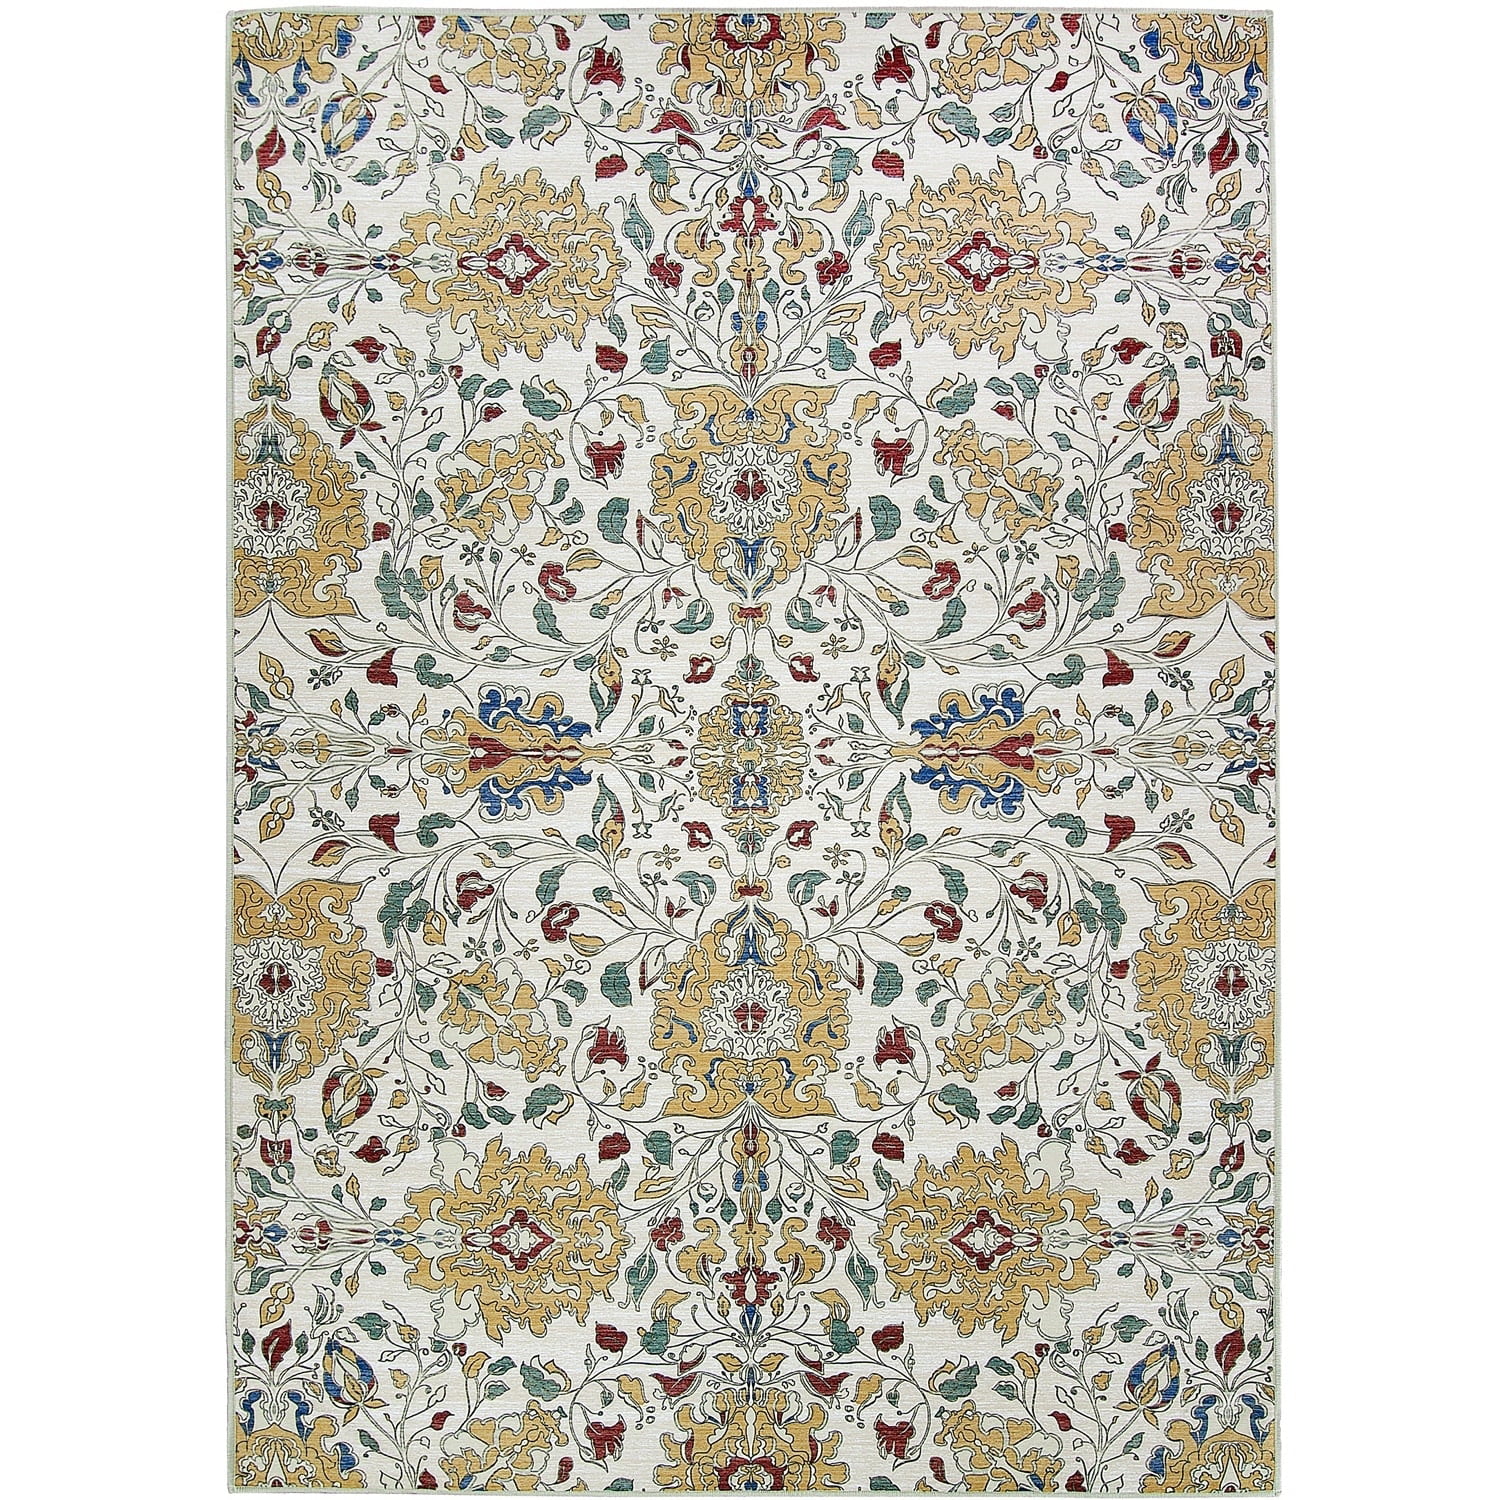 Ruggable Washable Stain Resistant Pet Area Rug Traditional Floral Cream 5' x 7'